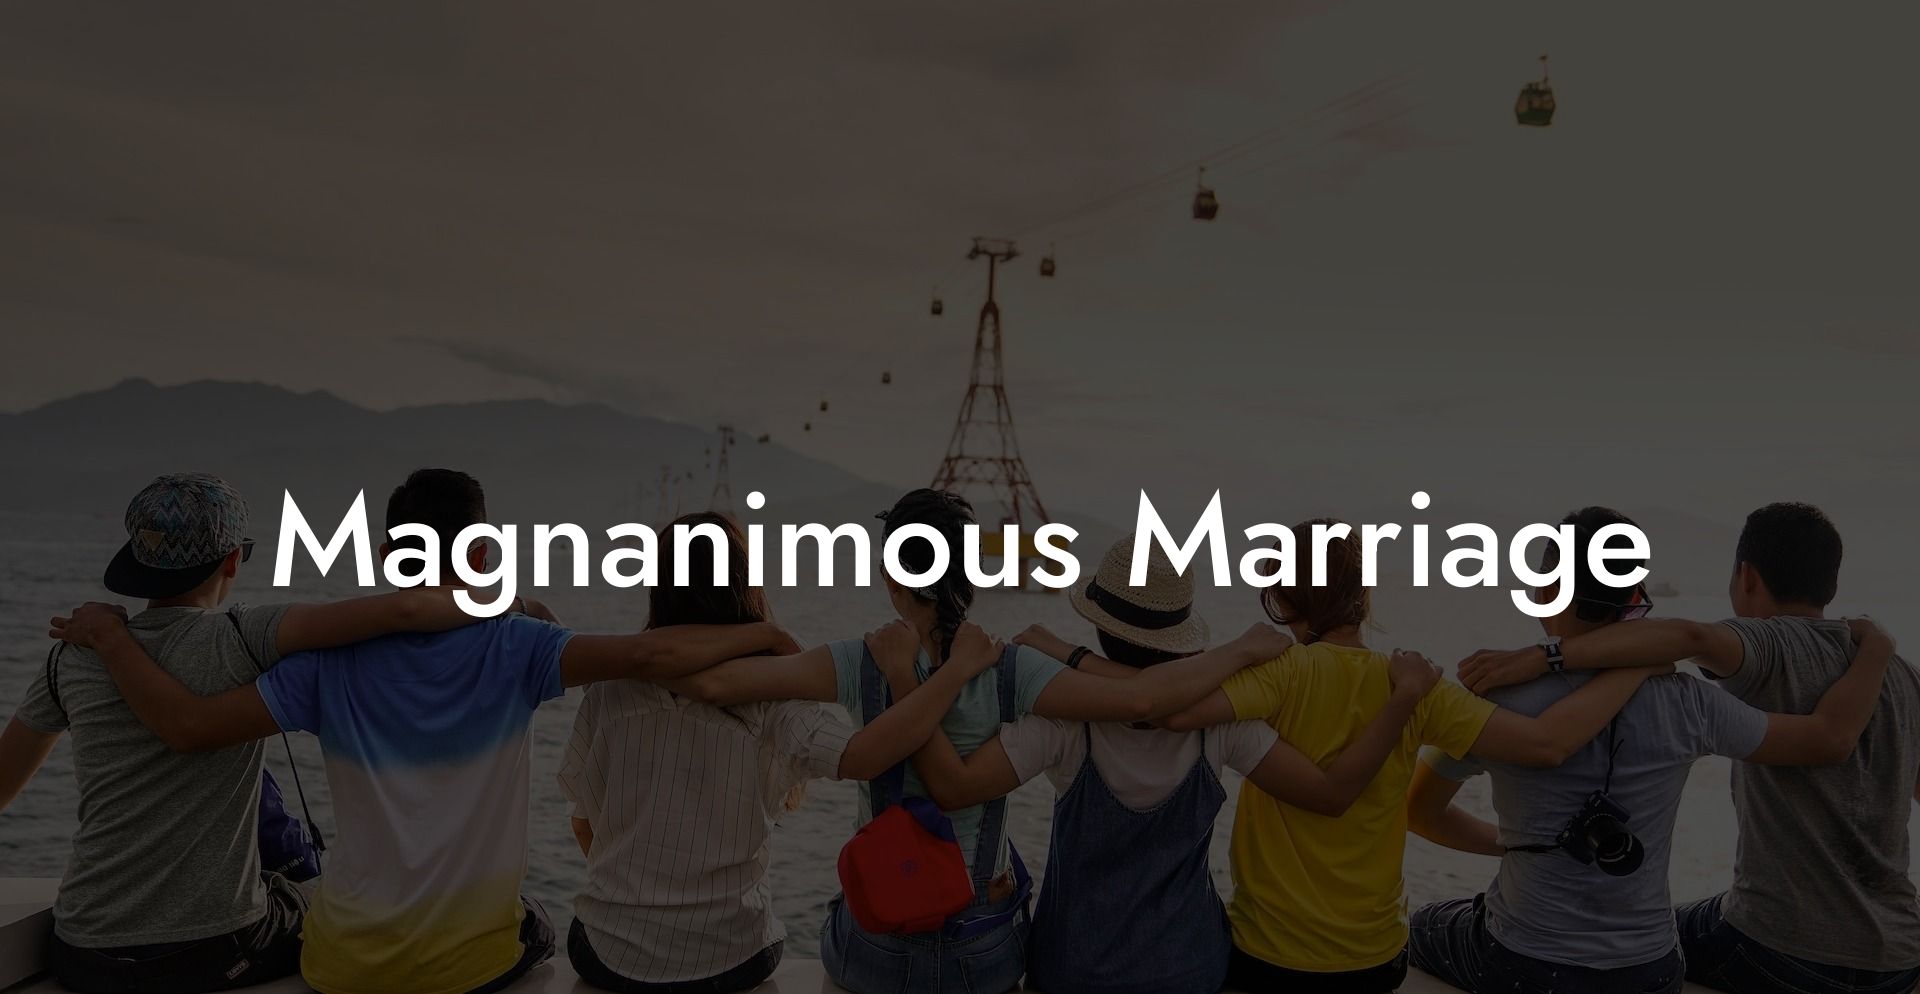 Magnanimous Marriage